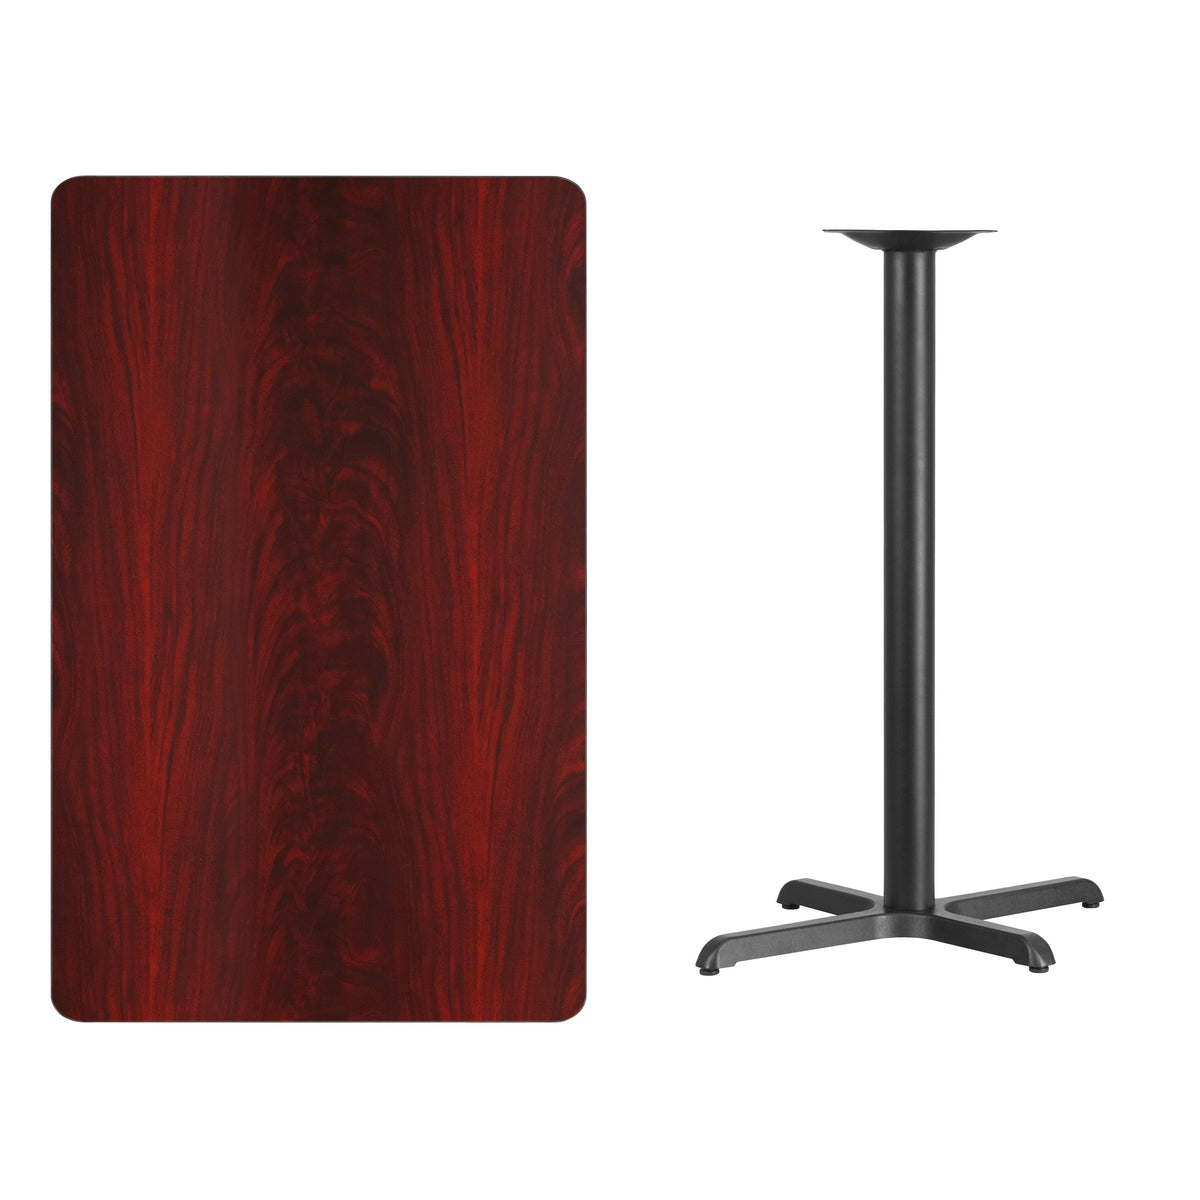 Mahogany |#| 30inch x 48inch Laminate Table Top with 23.5inch x 29.5inch Bar Height Table Base